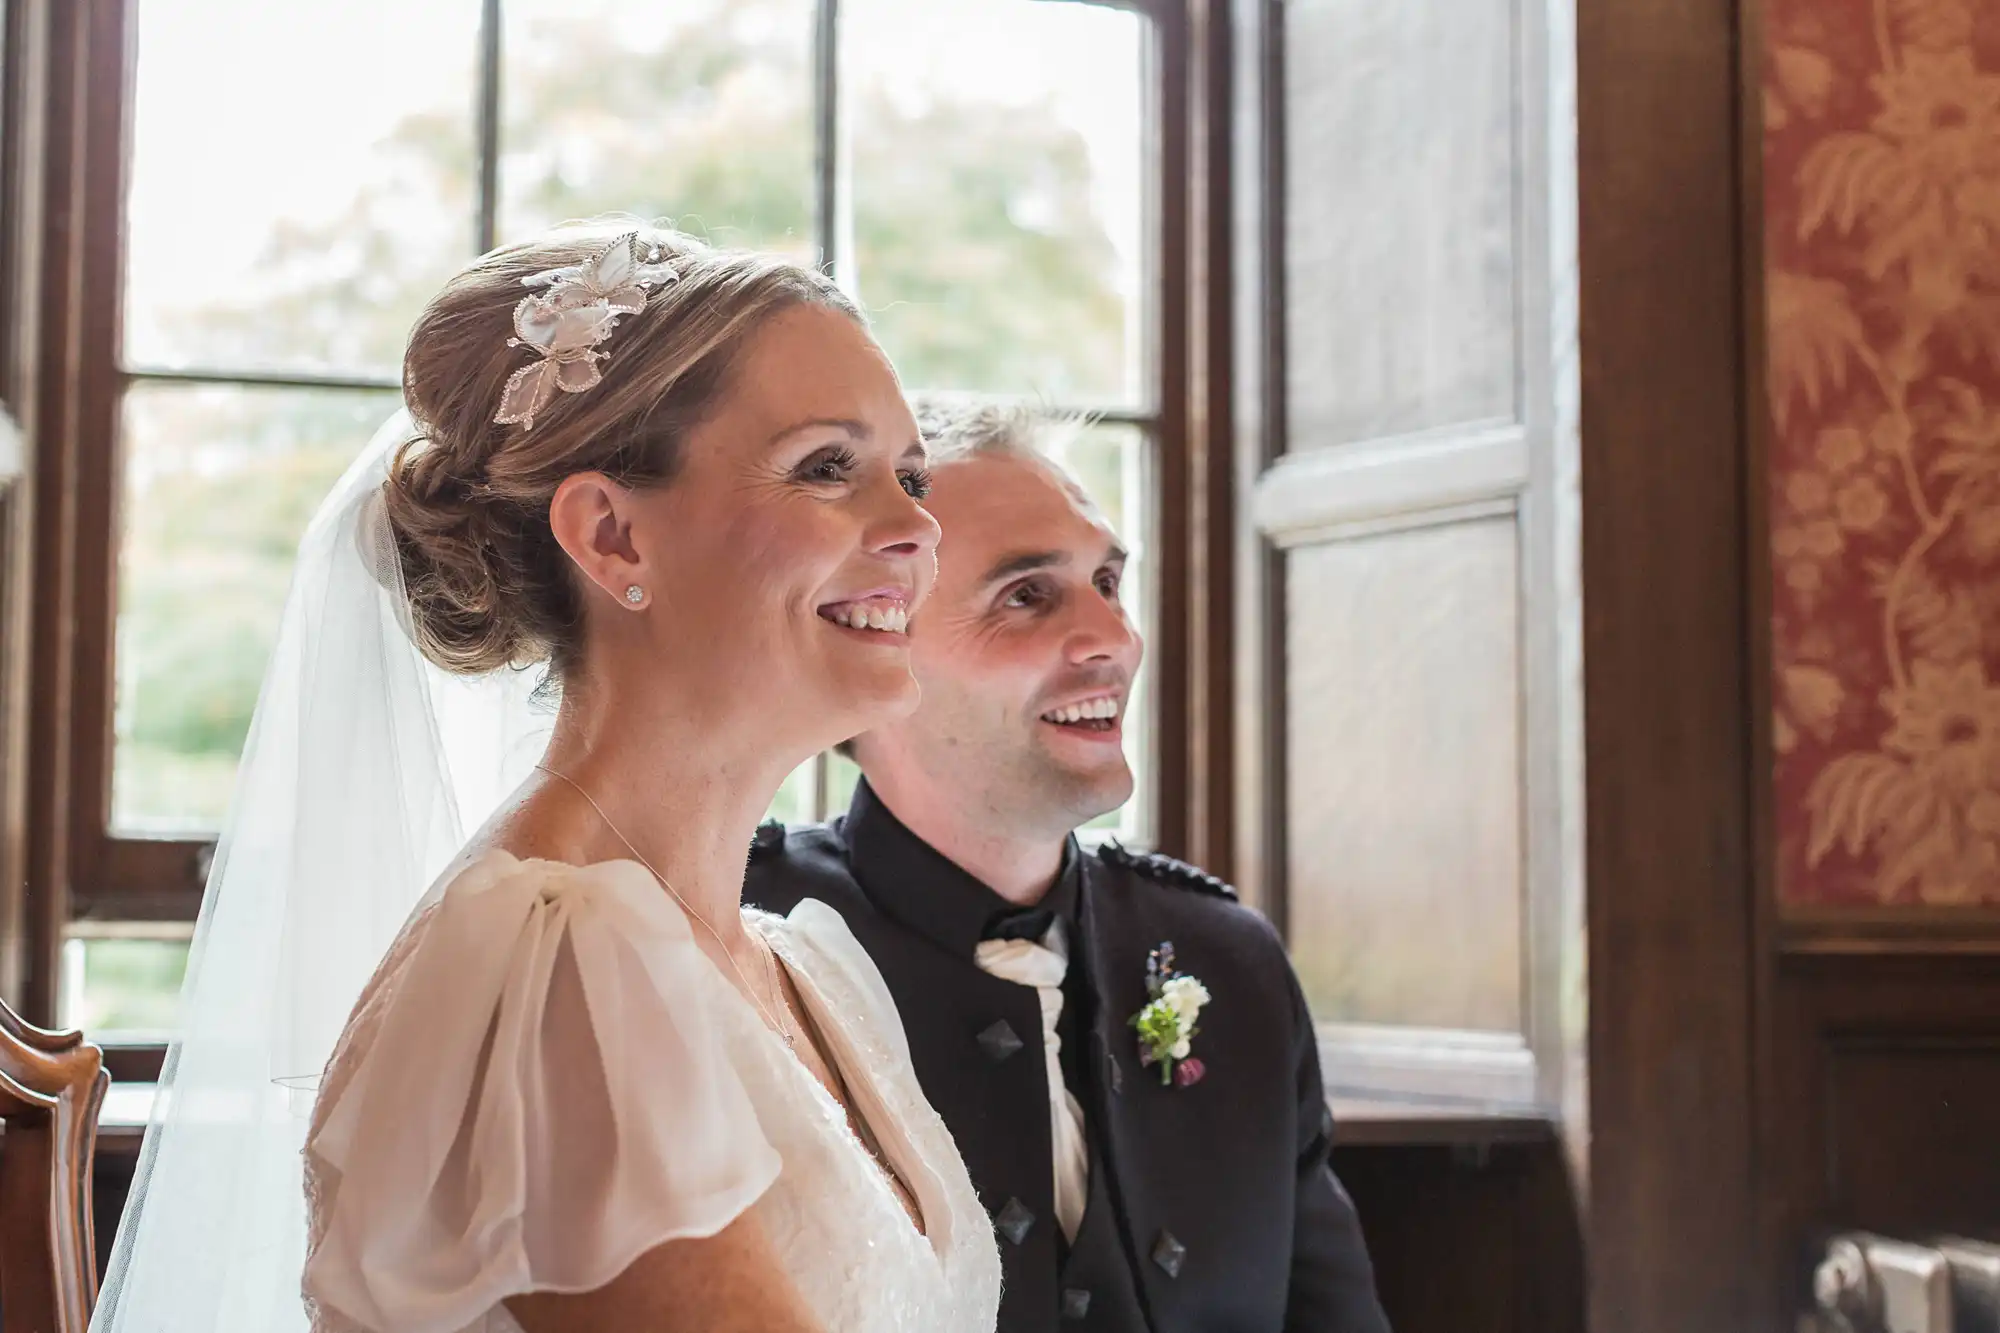 A bride and groom smiling and looking out a window, the bride in a veil and the groom in a black suit.